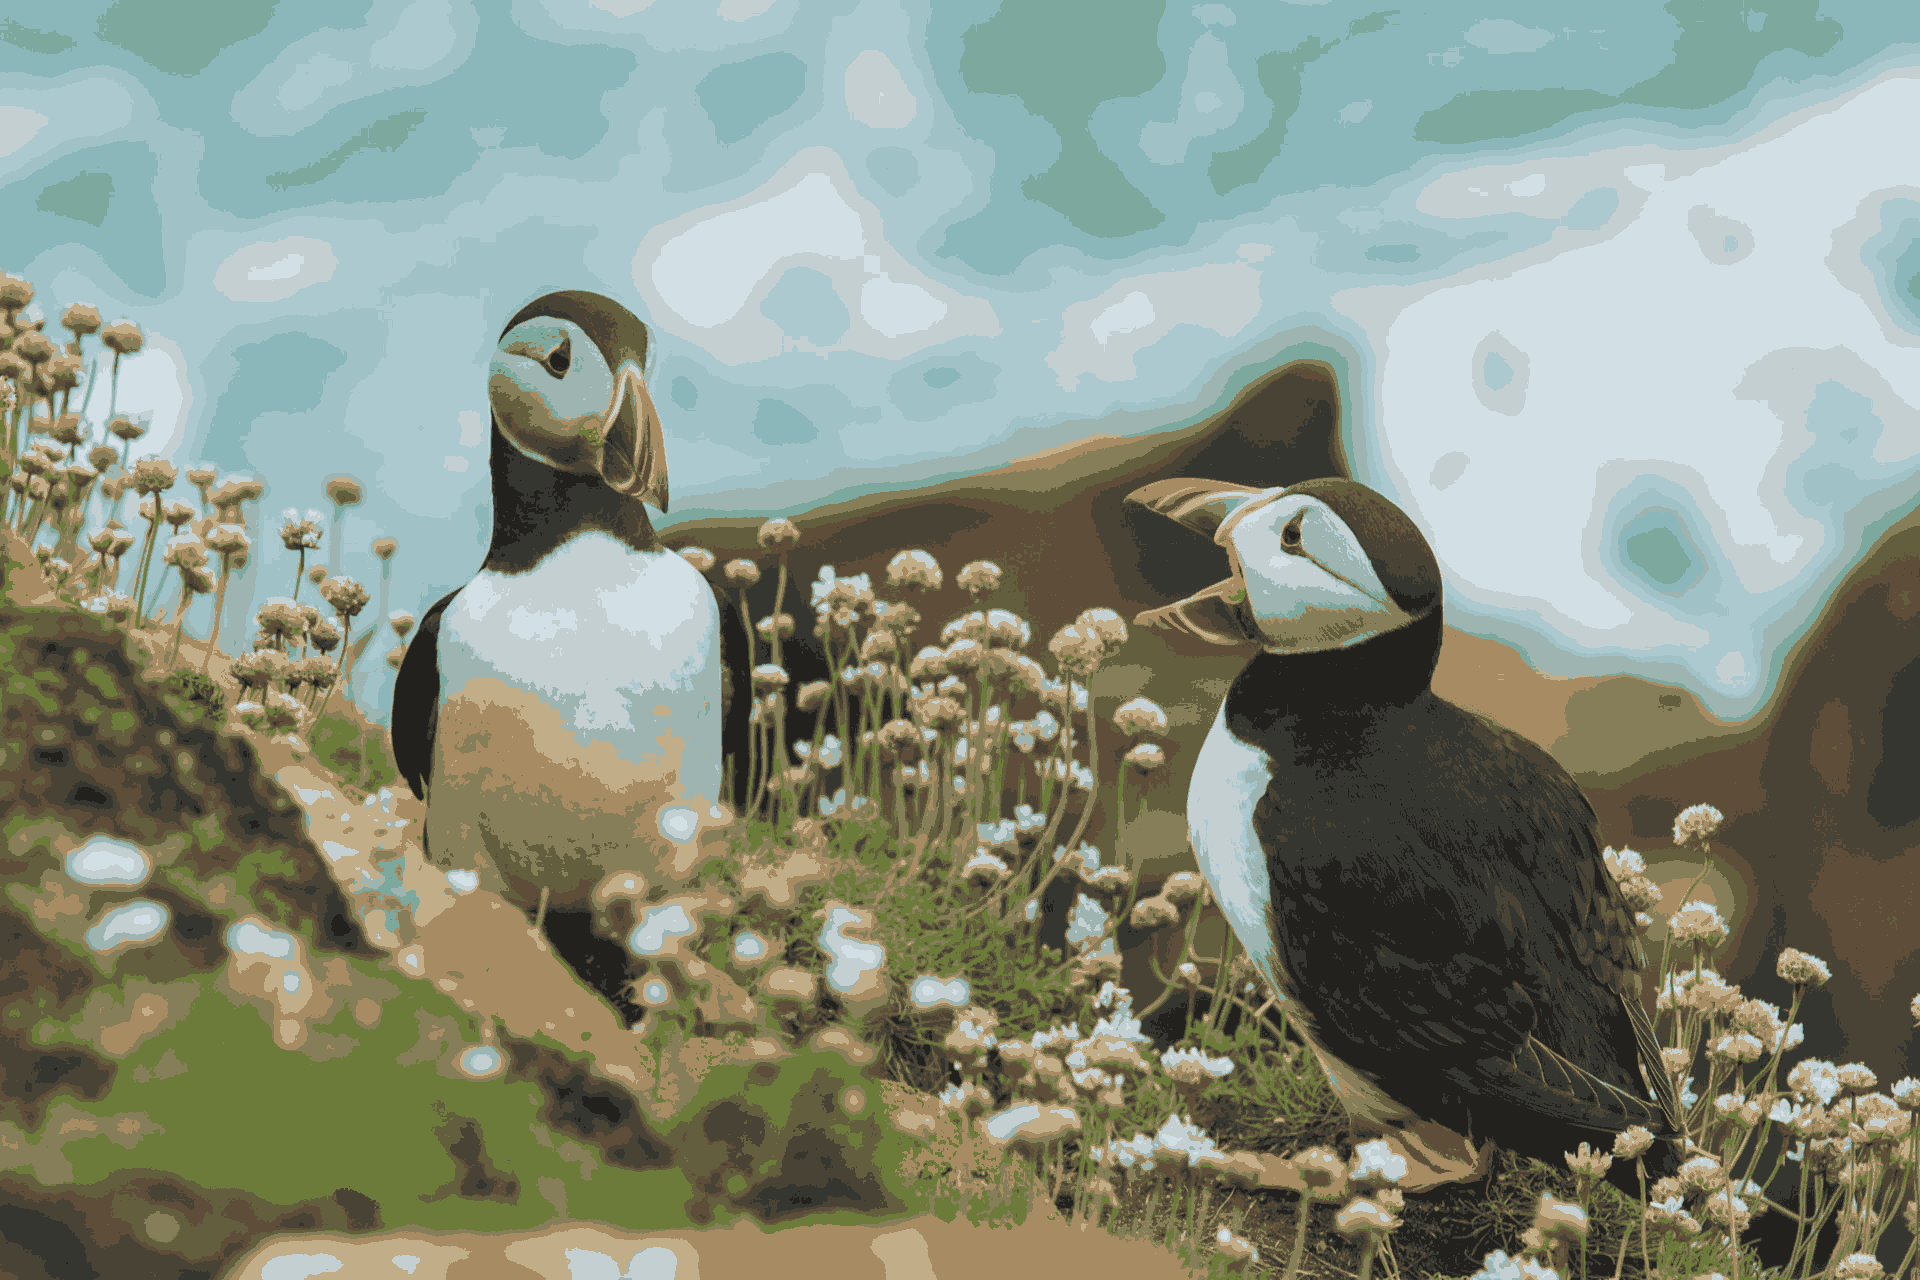 The “puffins” image, reduced to 16 colors